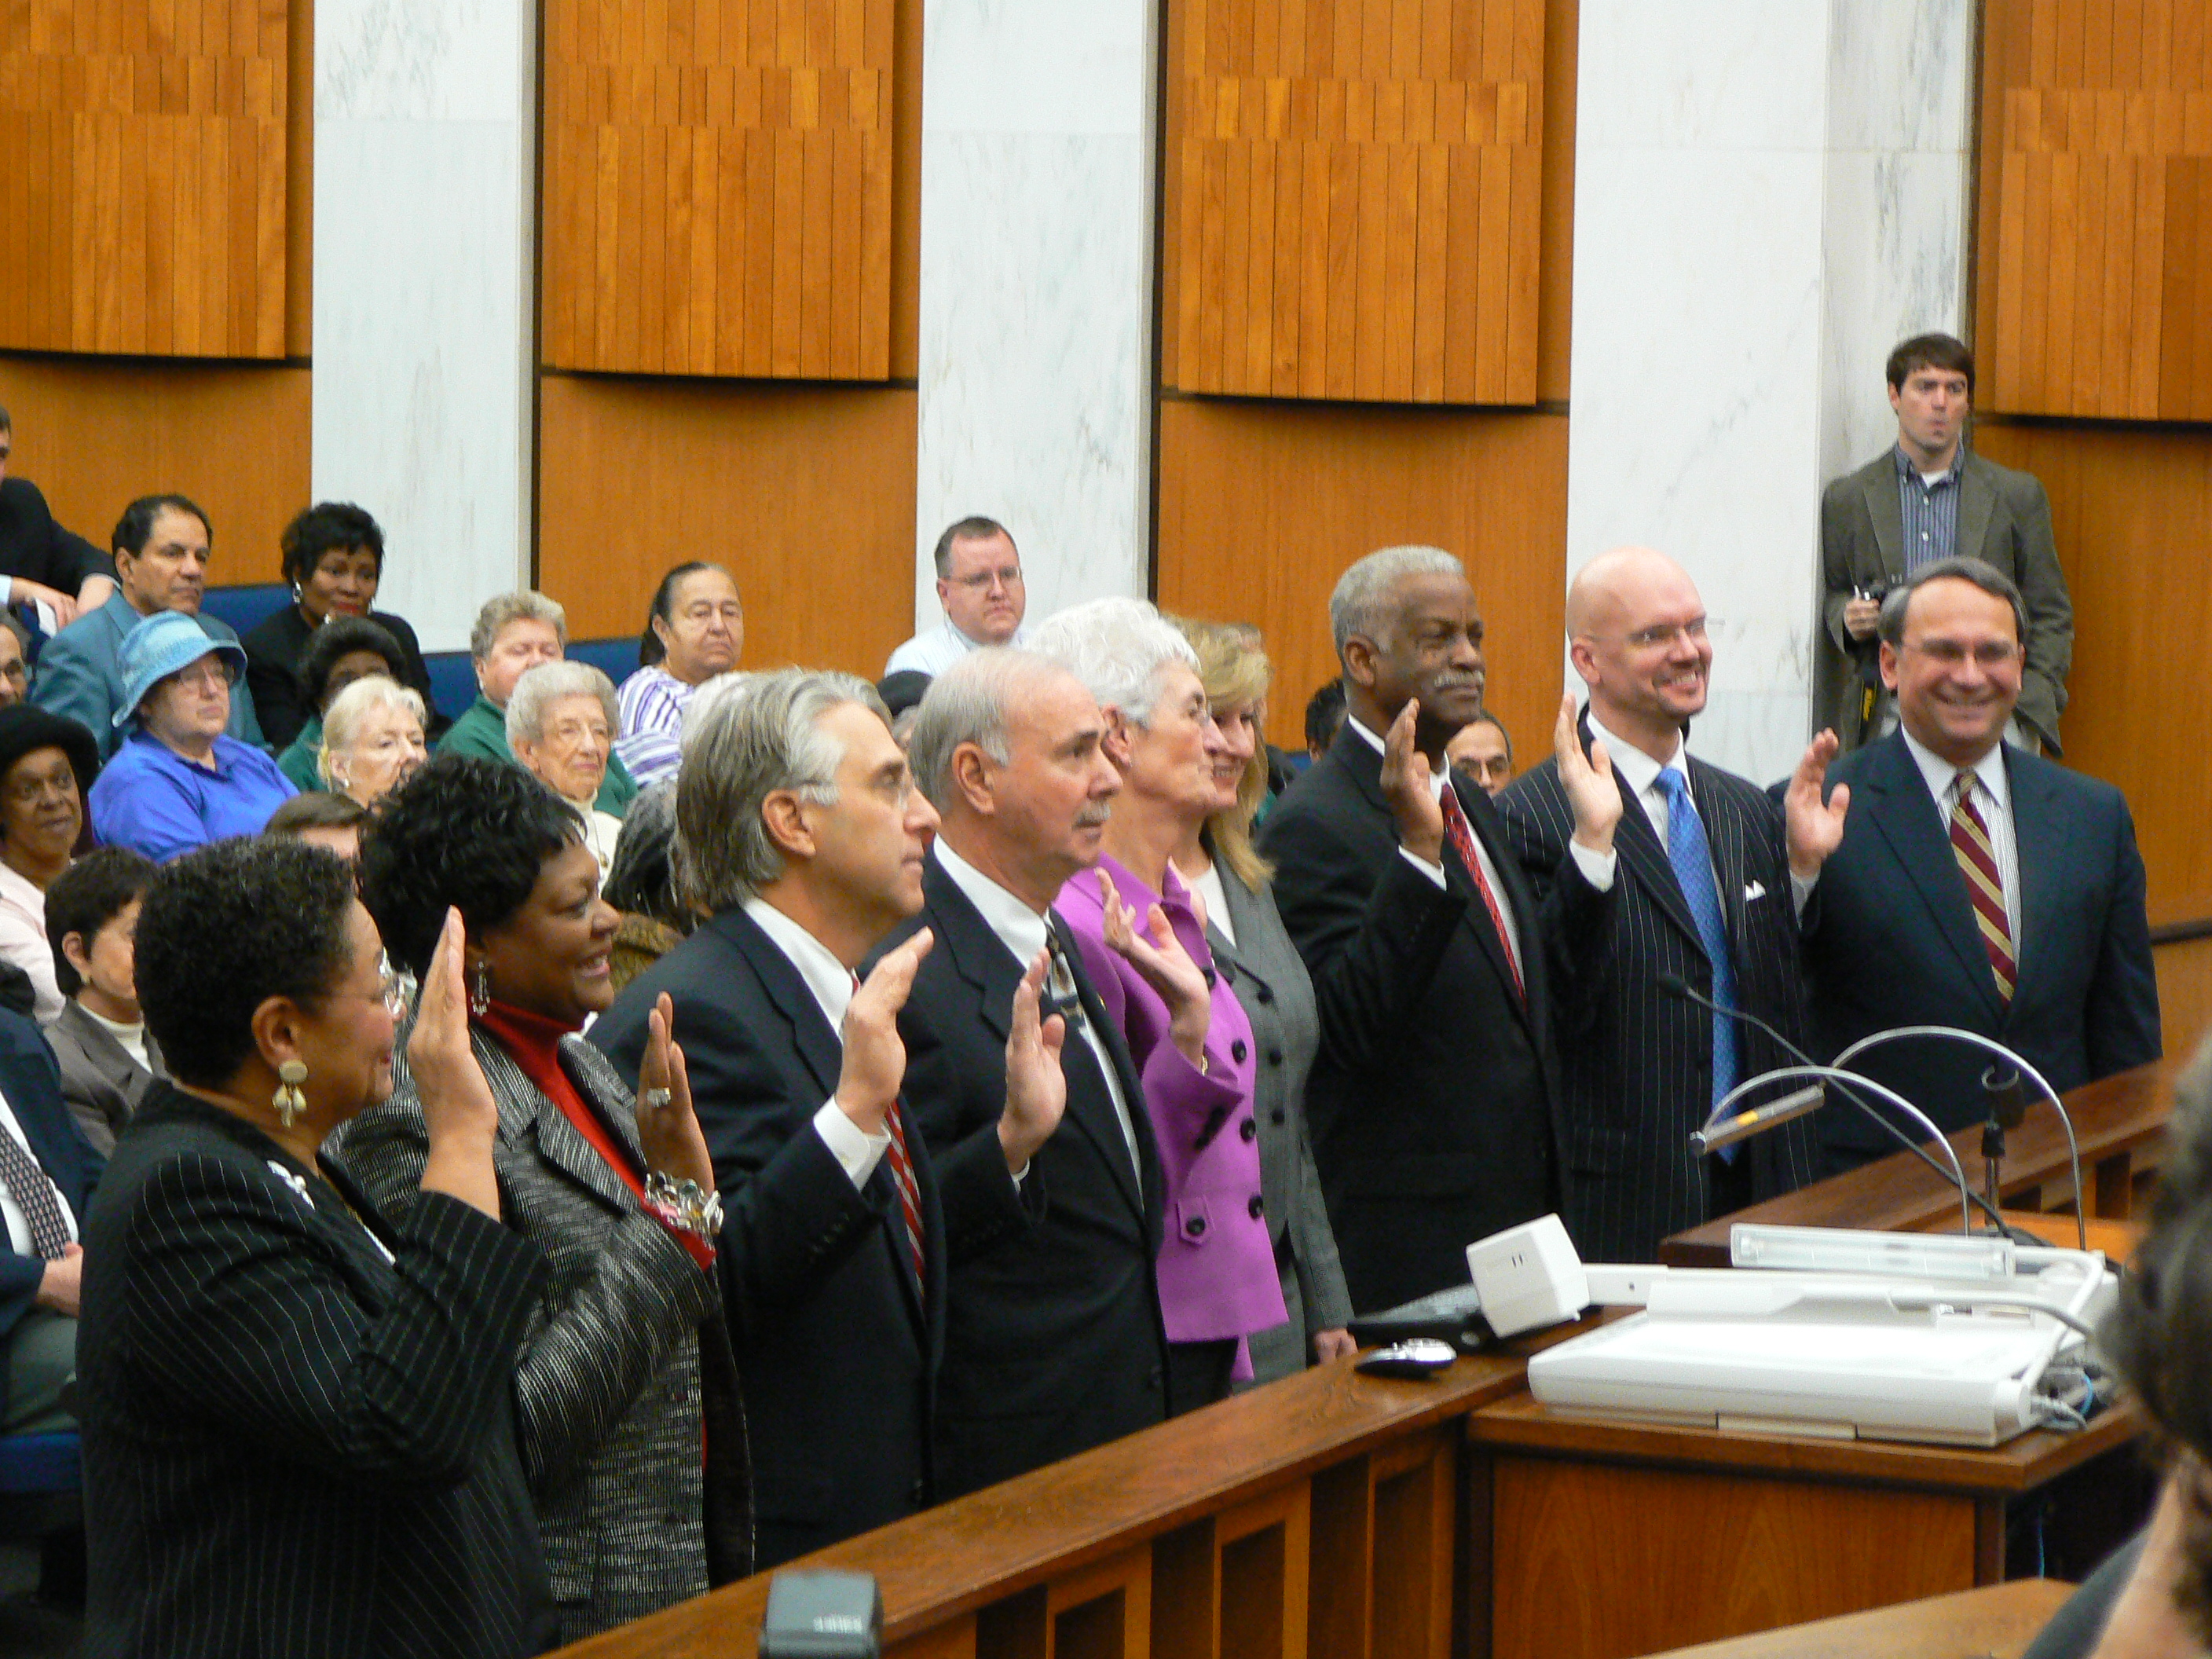 Photo of Richmond City Council swearing in ceremony from 2007. 